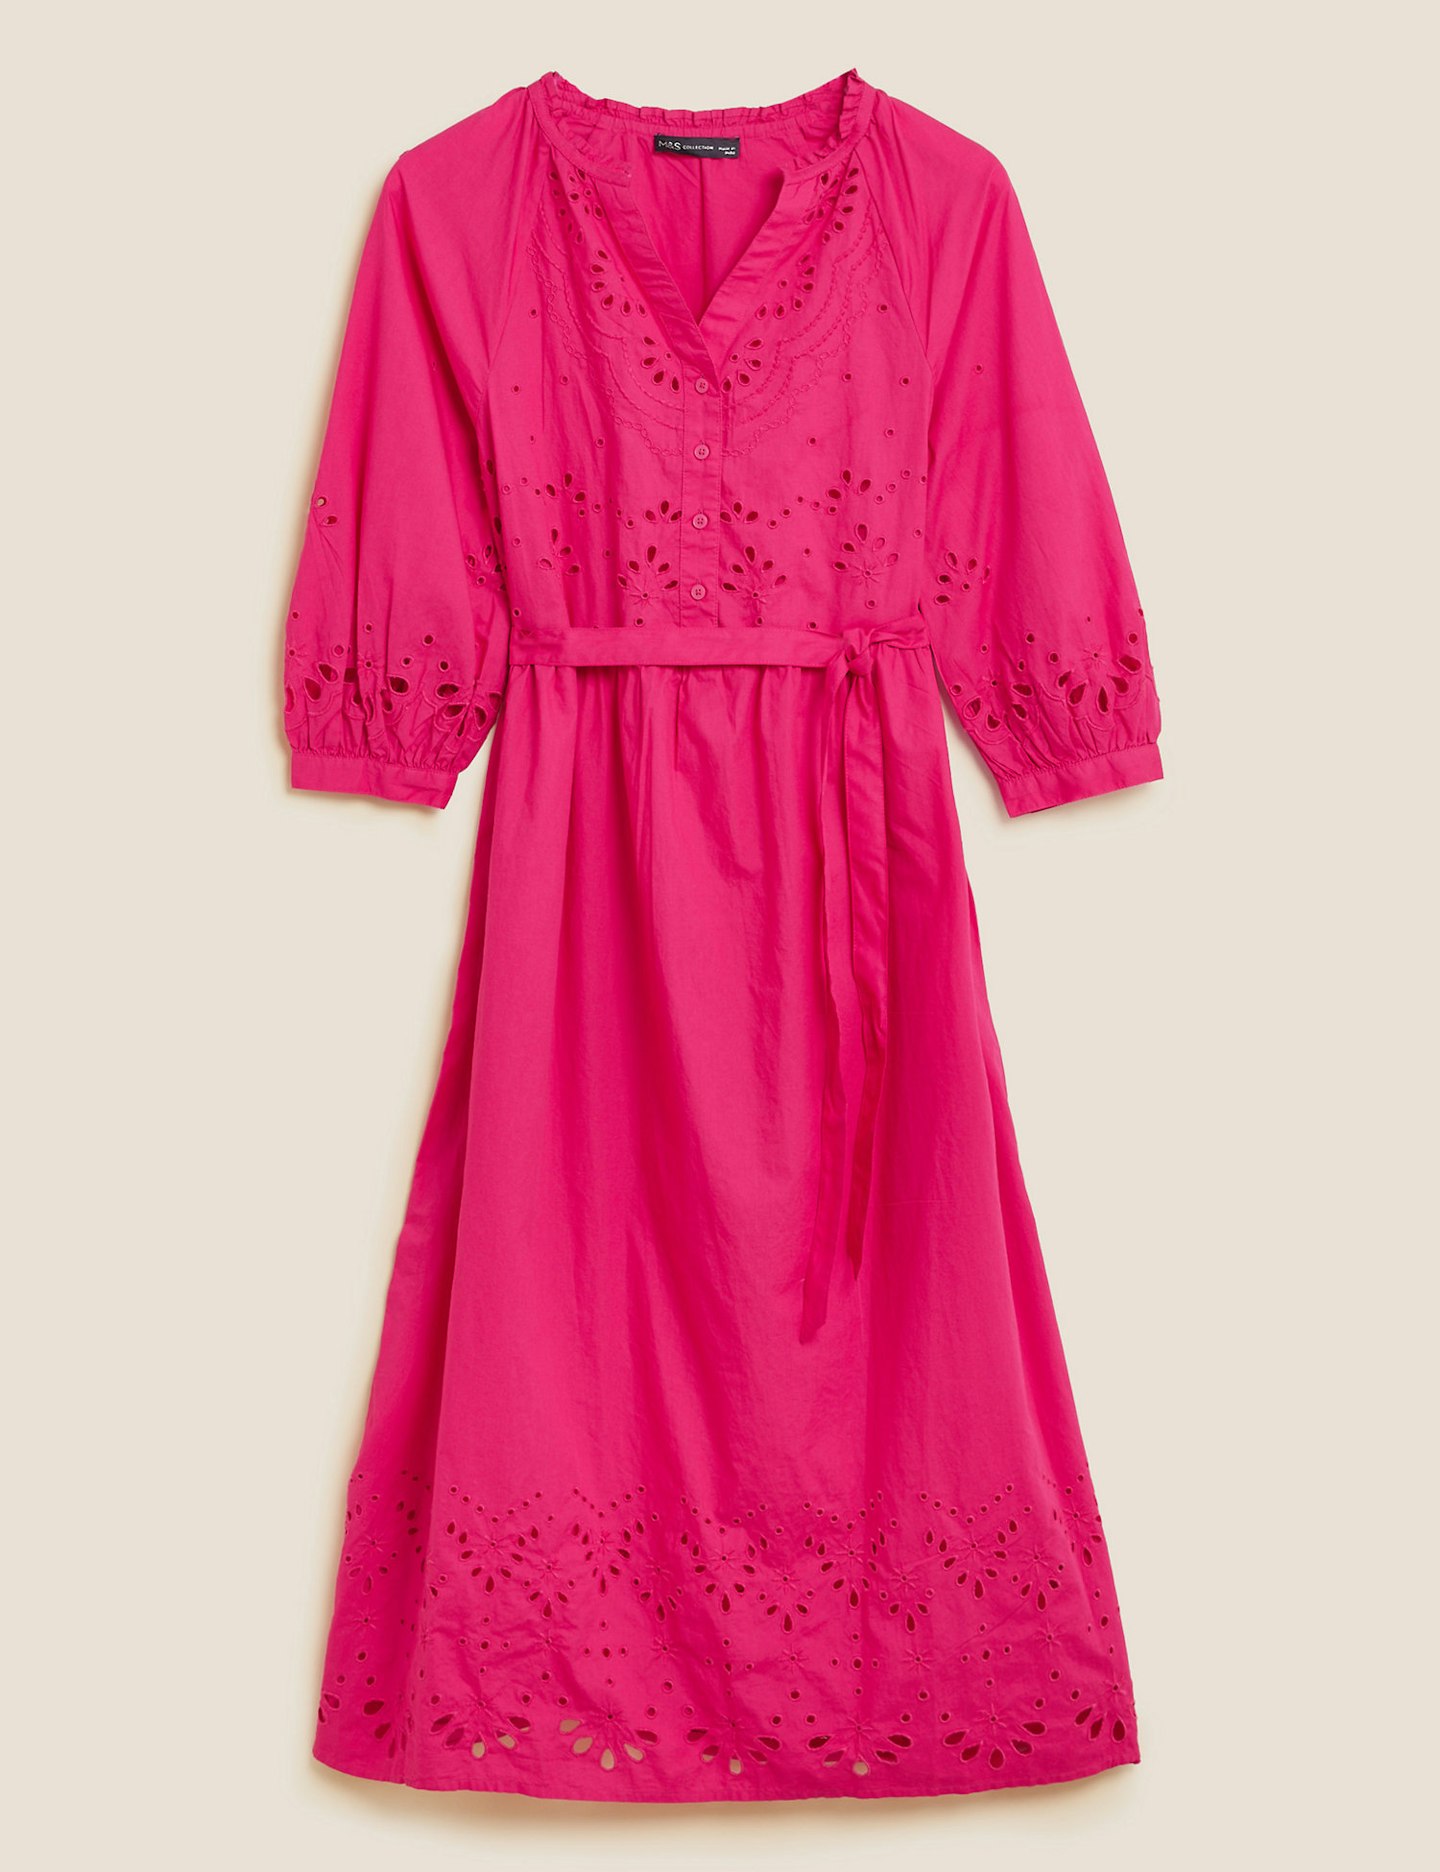 Holly Willoughby marks and Spencer summer edit Pure Cotton Embroidered V-Neck Midi Dress, £49.50